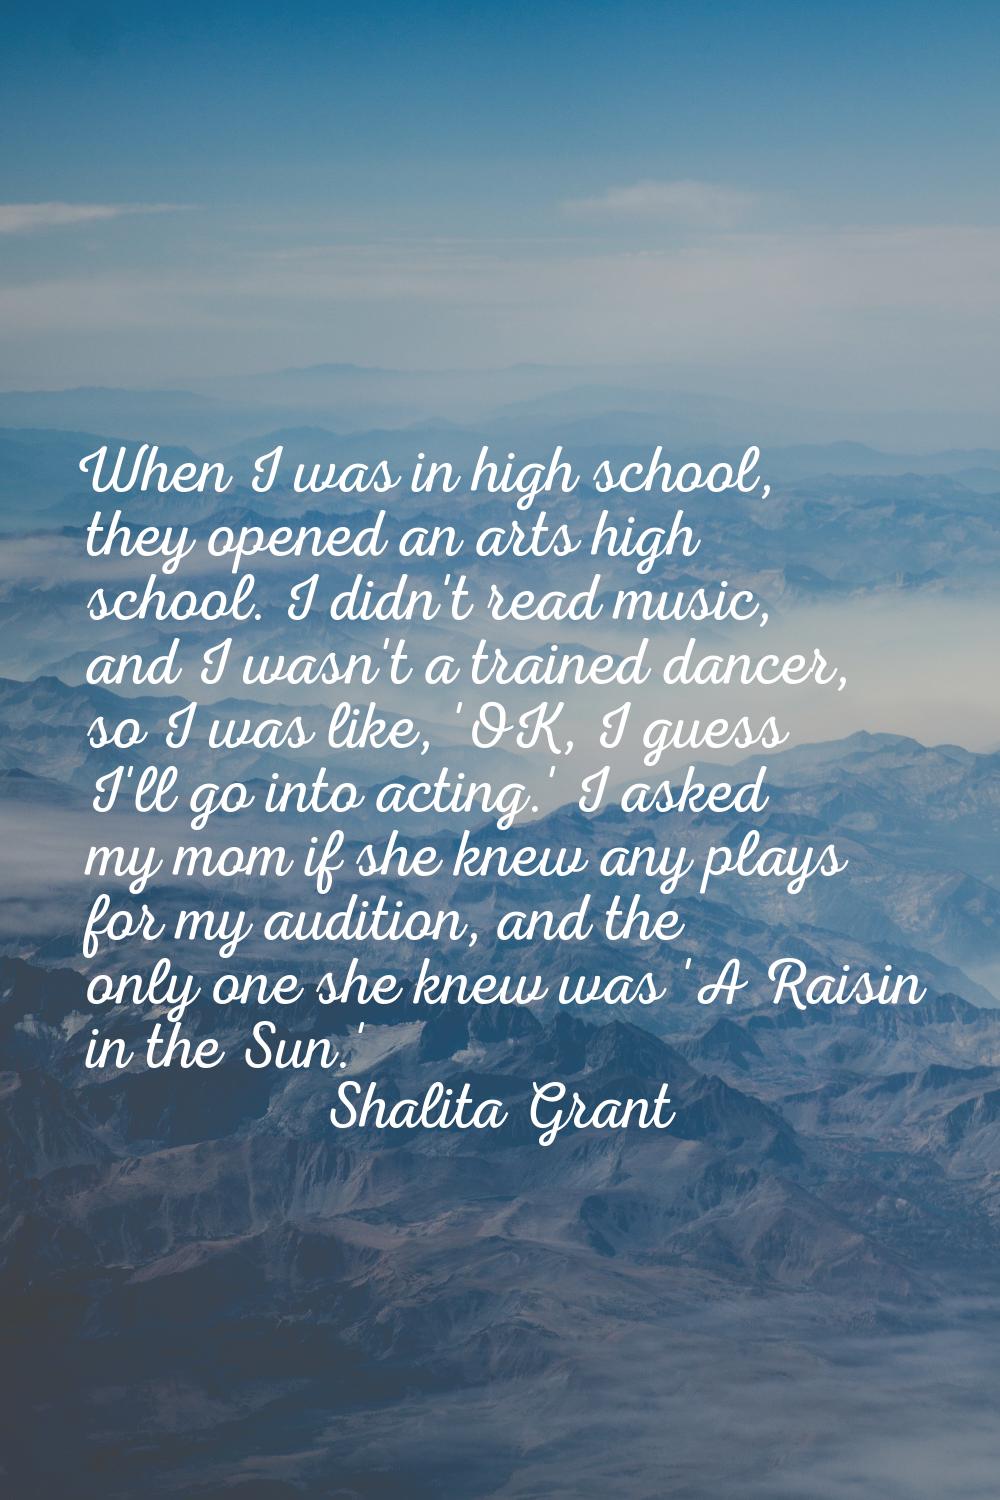 When I was in high school, they opened an arts high school. I didn't read music, and I wasn't a tra